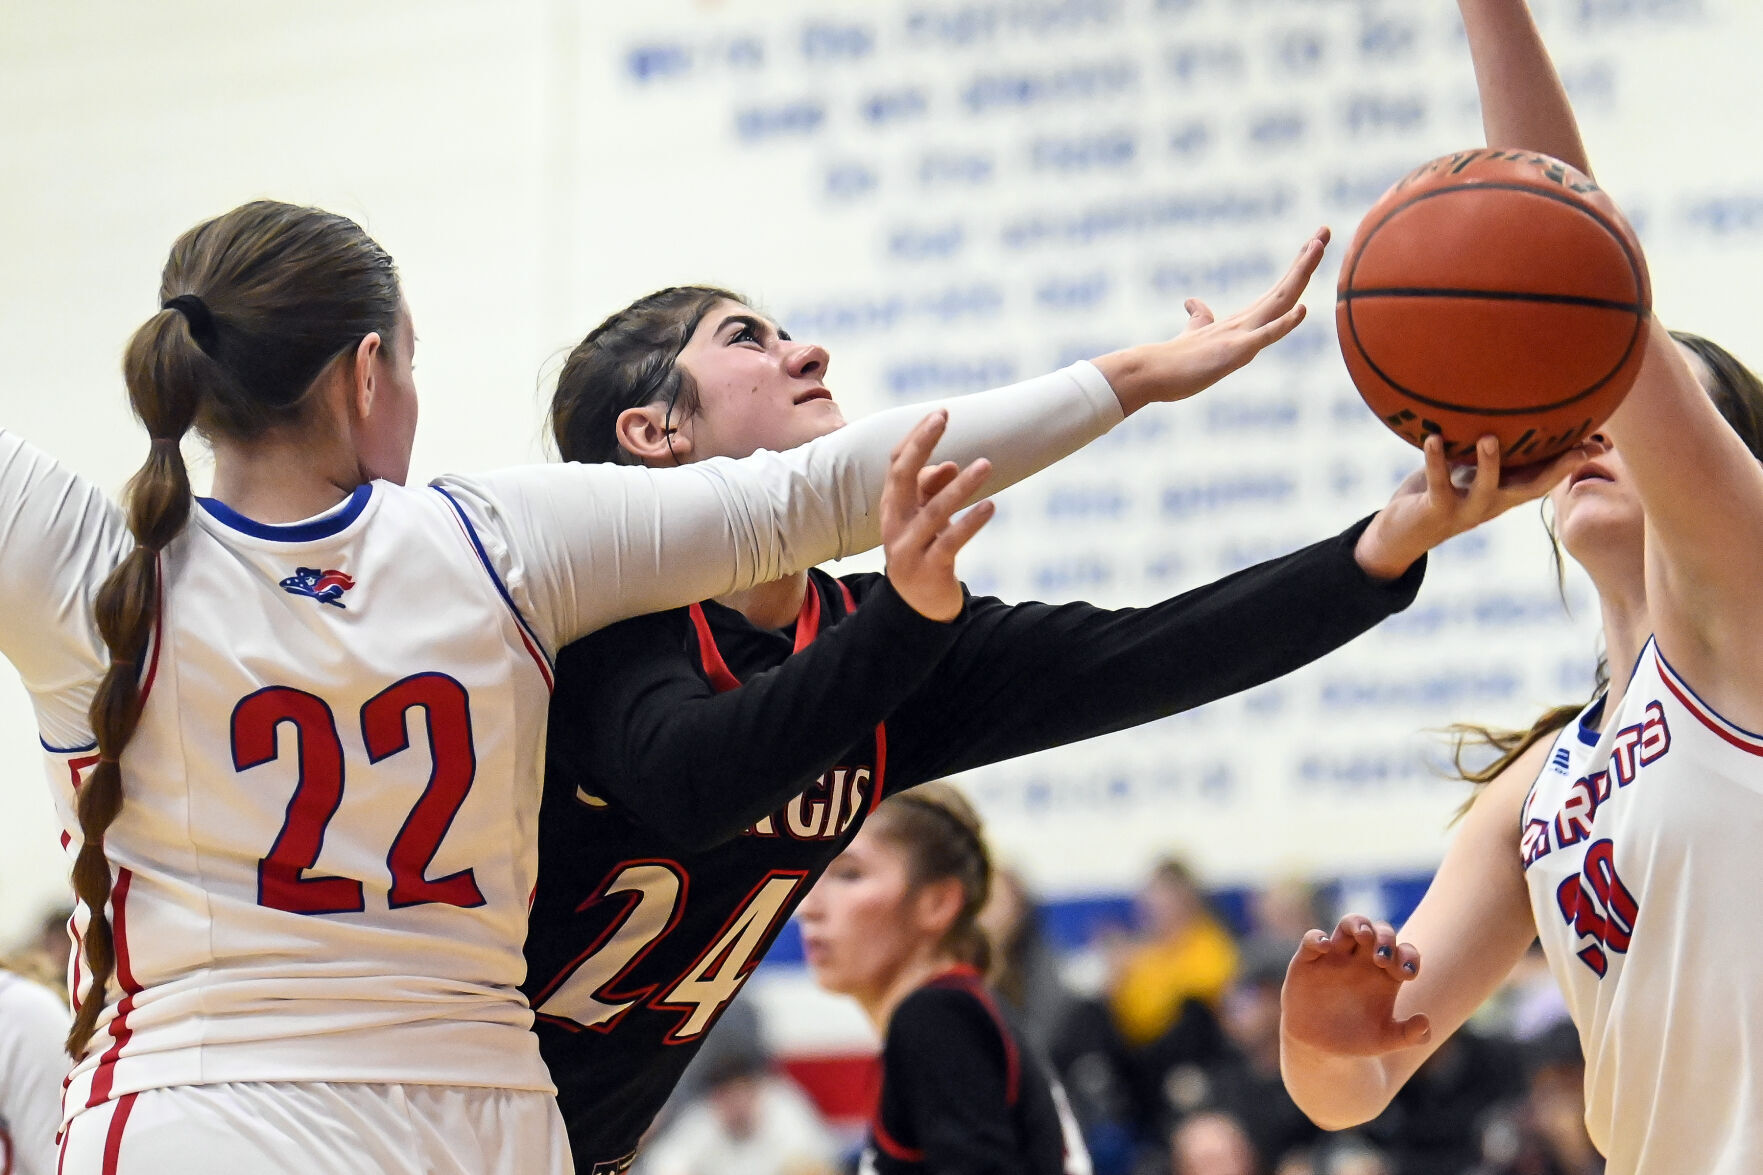 Sturgis Brown Scoopers Win 42-33 Against Douglas in Girls’ Basketball Match